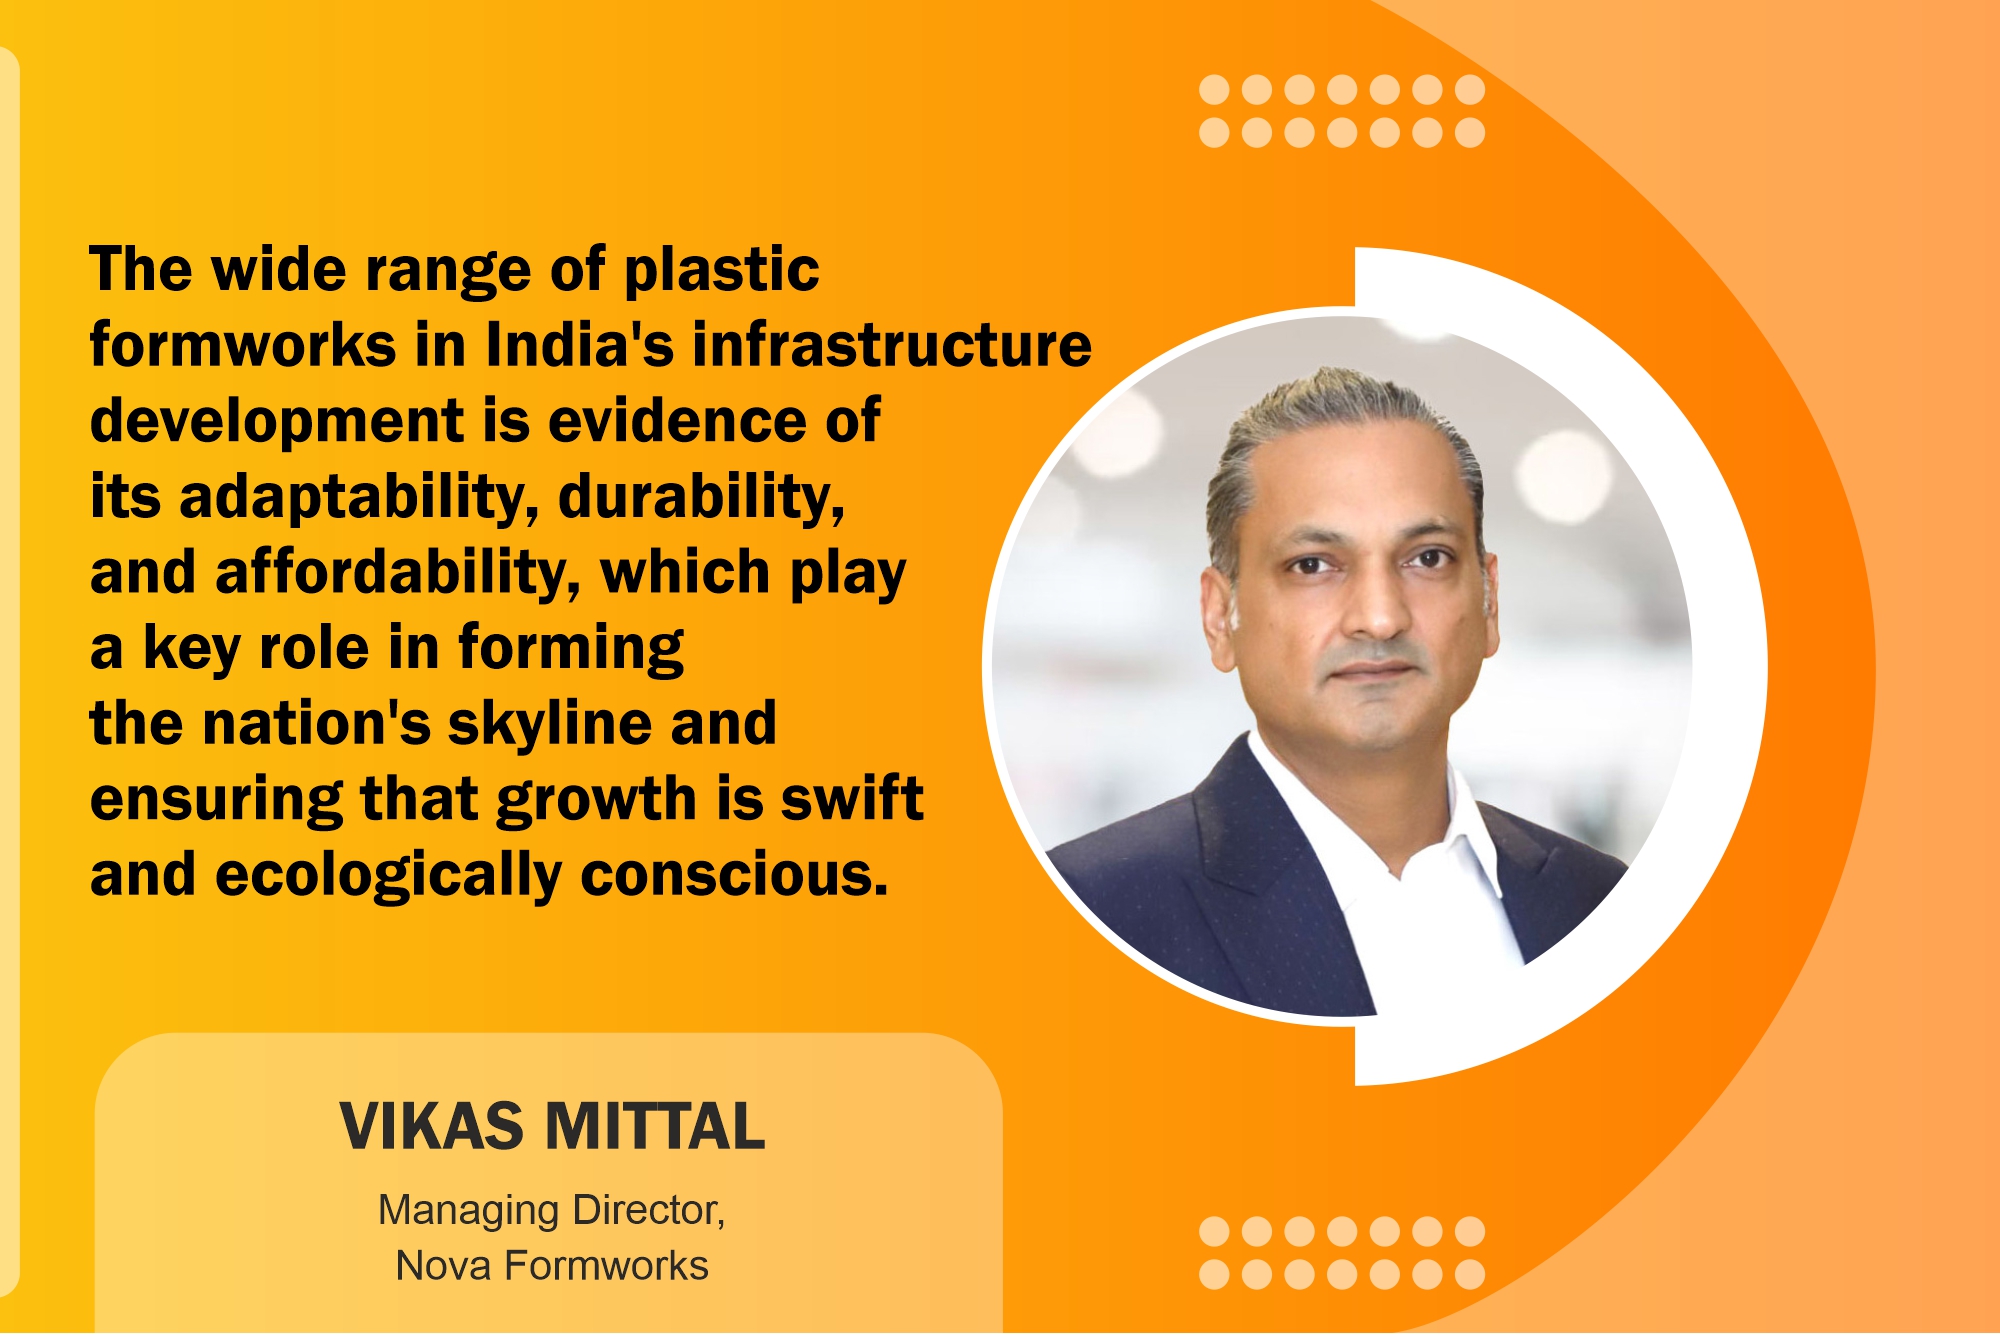 The scope of plastic formworks in Indian infra projects